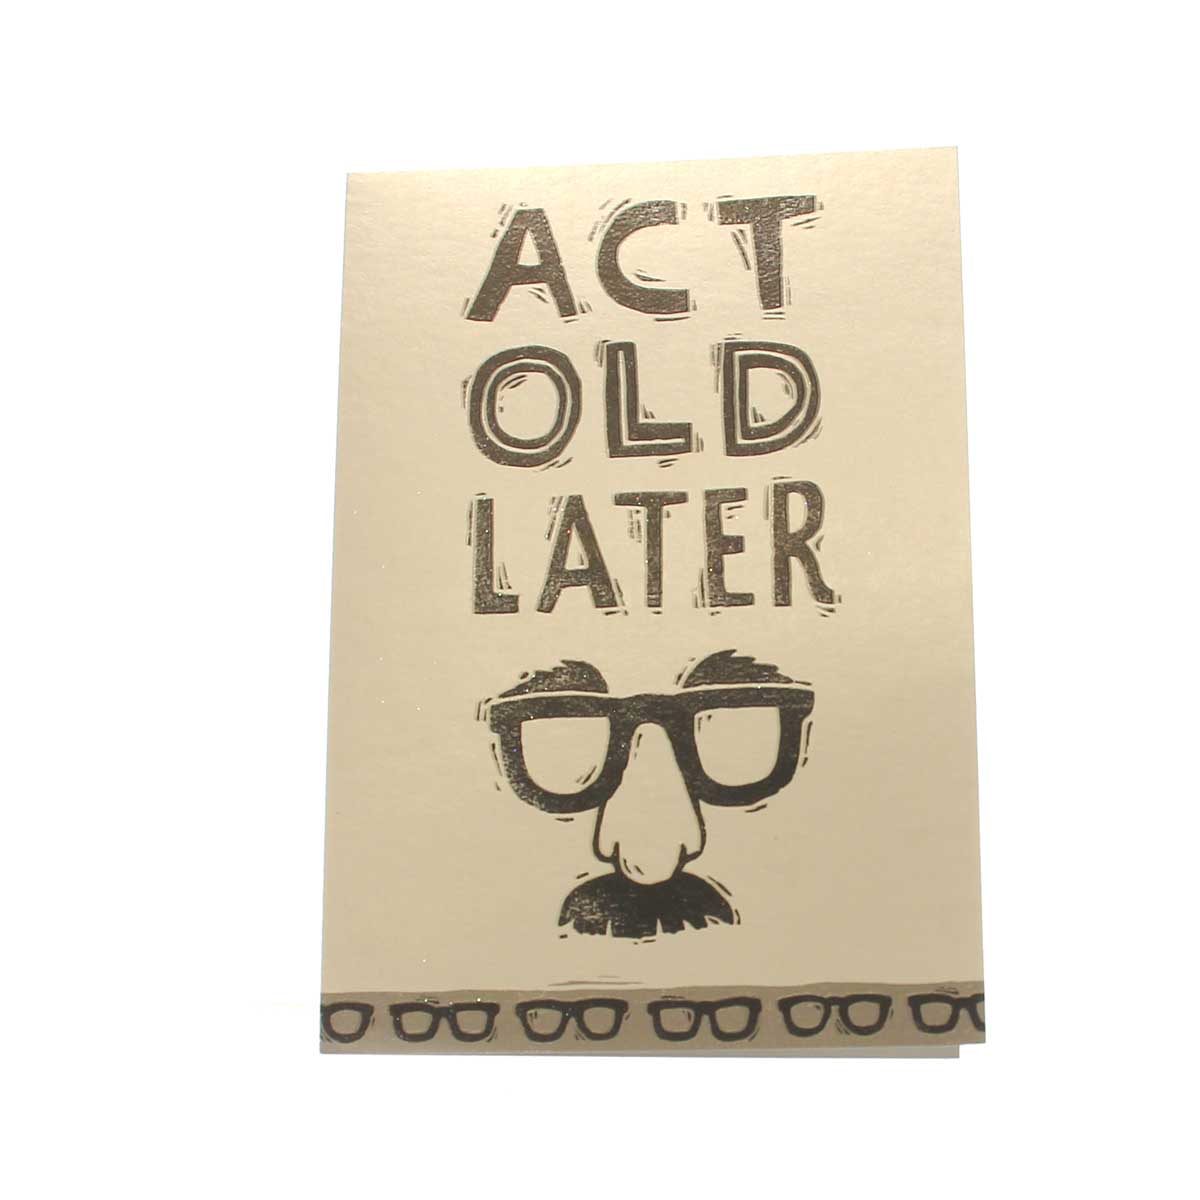 Birthday Card: "Act old later" w/ moustache